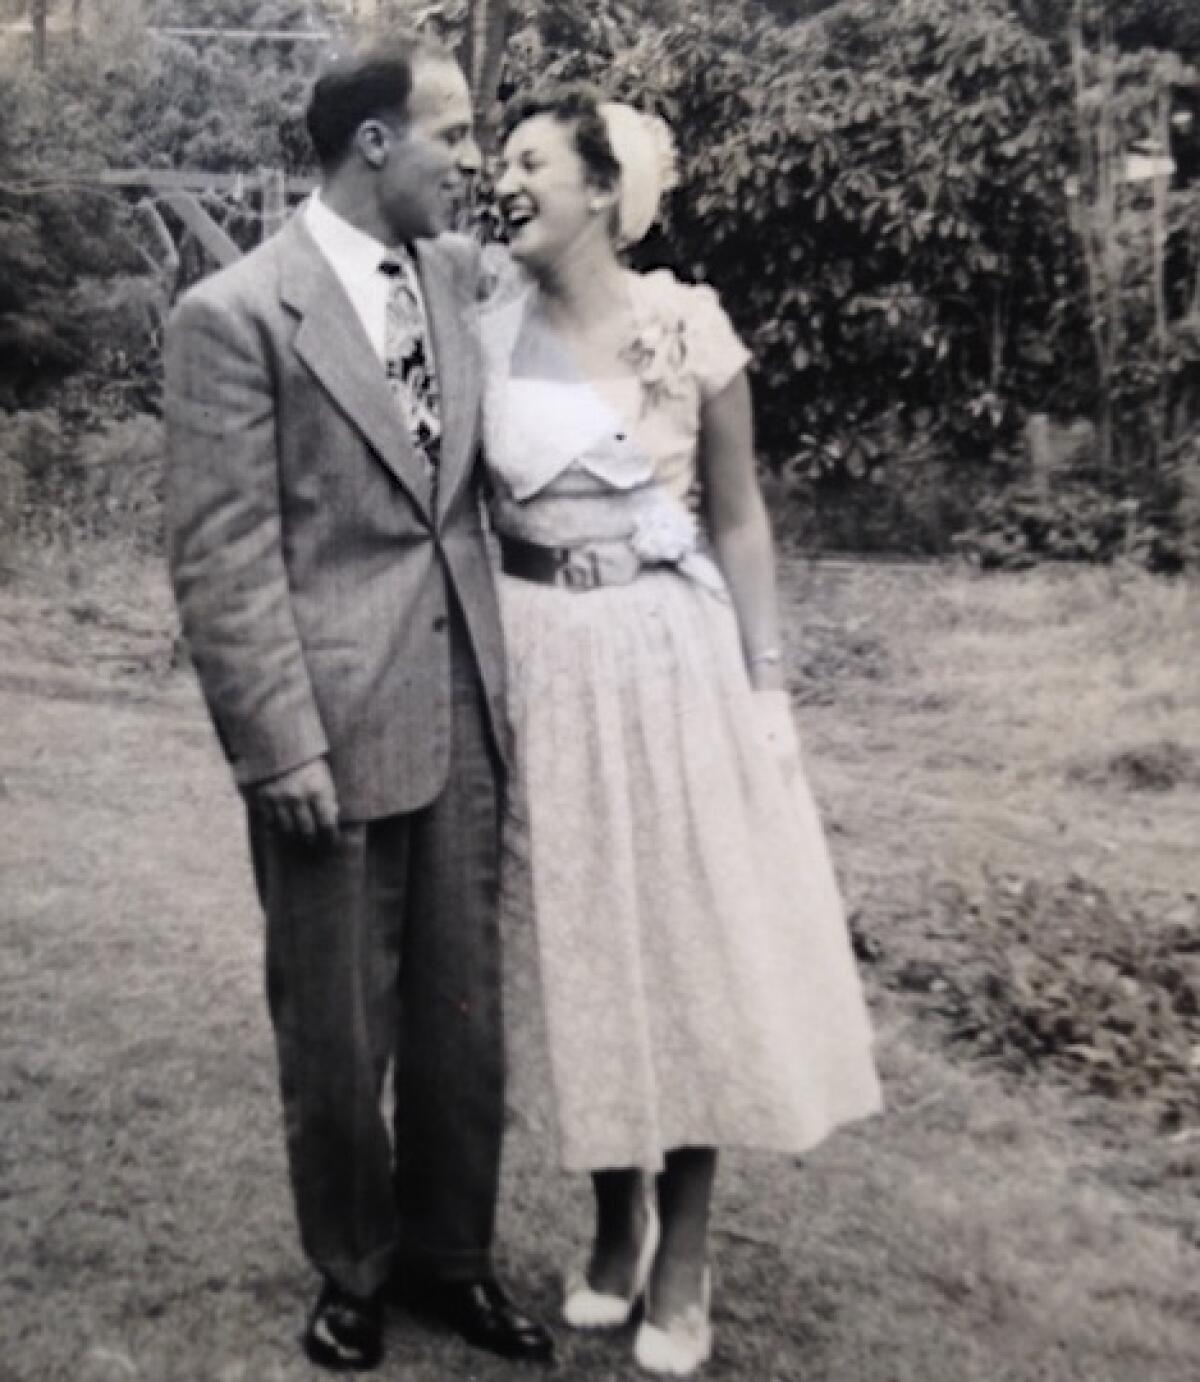 Ed and Mary Romeo are pictured in 1950 in Hawaii.